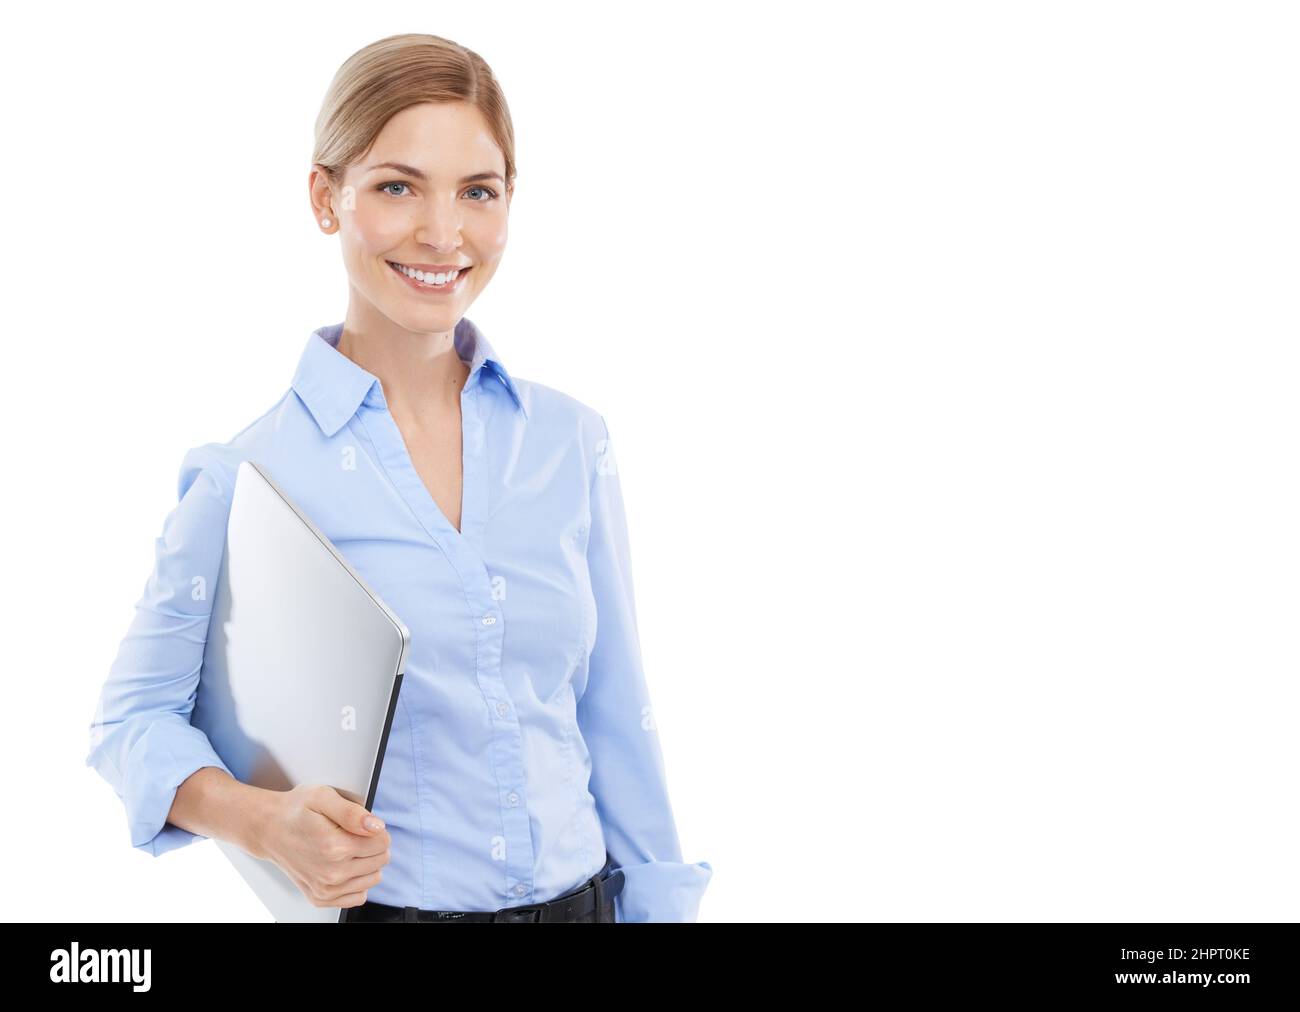 All I need for business. Studio shot of a beautiful young businesswoman holding a laptop against a white background. Stock Photo